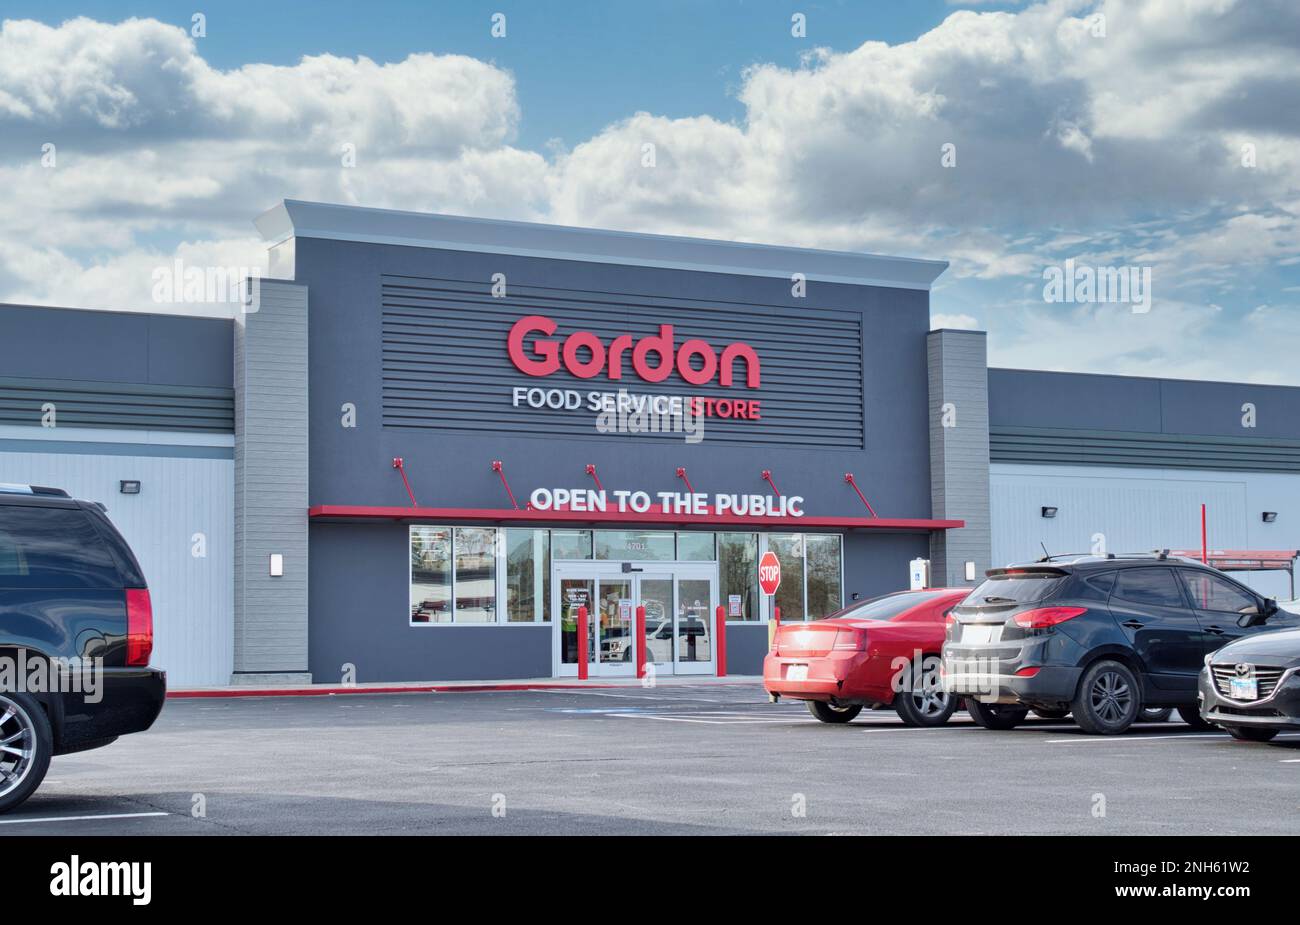 Houston, Texas USA 02-17-2023: Gordon food service store exterior and parking lot in Houston, TX. Foodservice distributor founded in 1897. Stock Photo